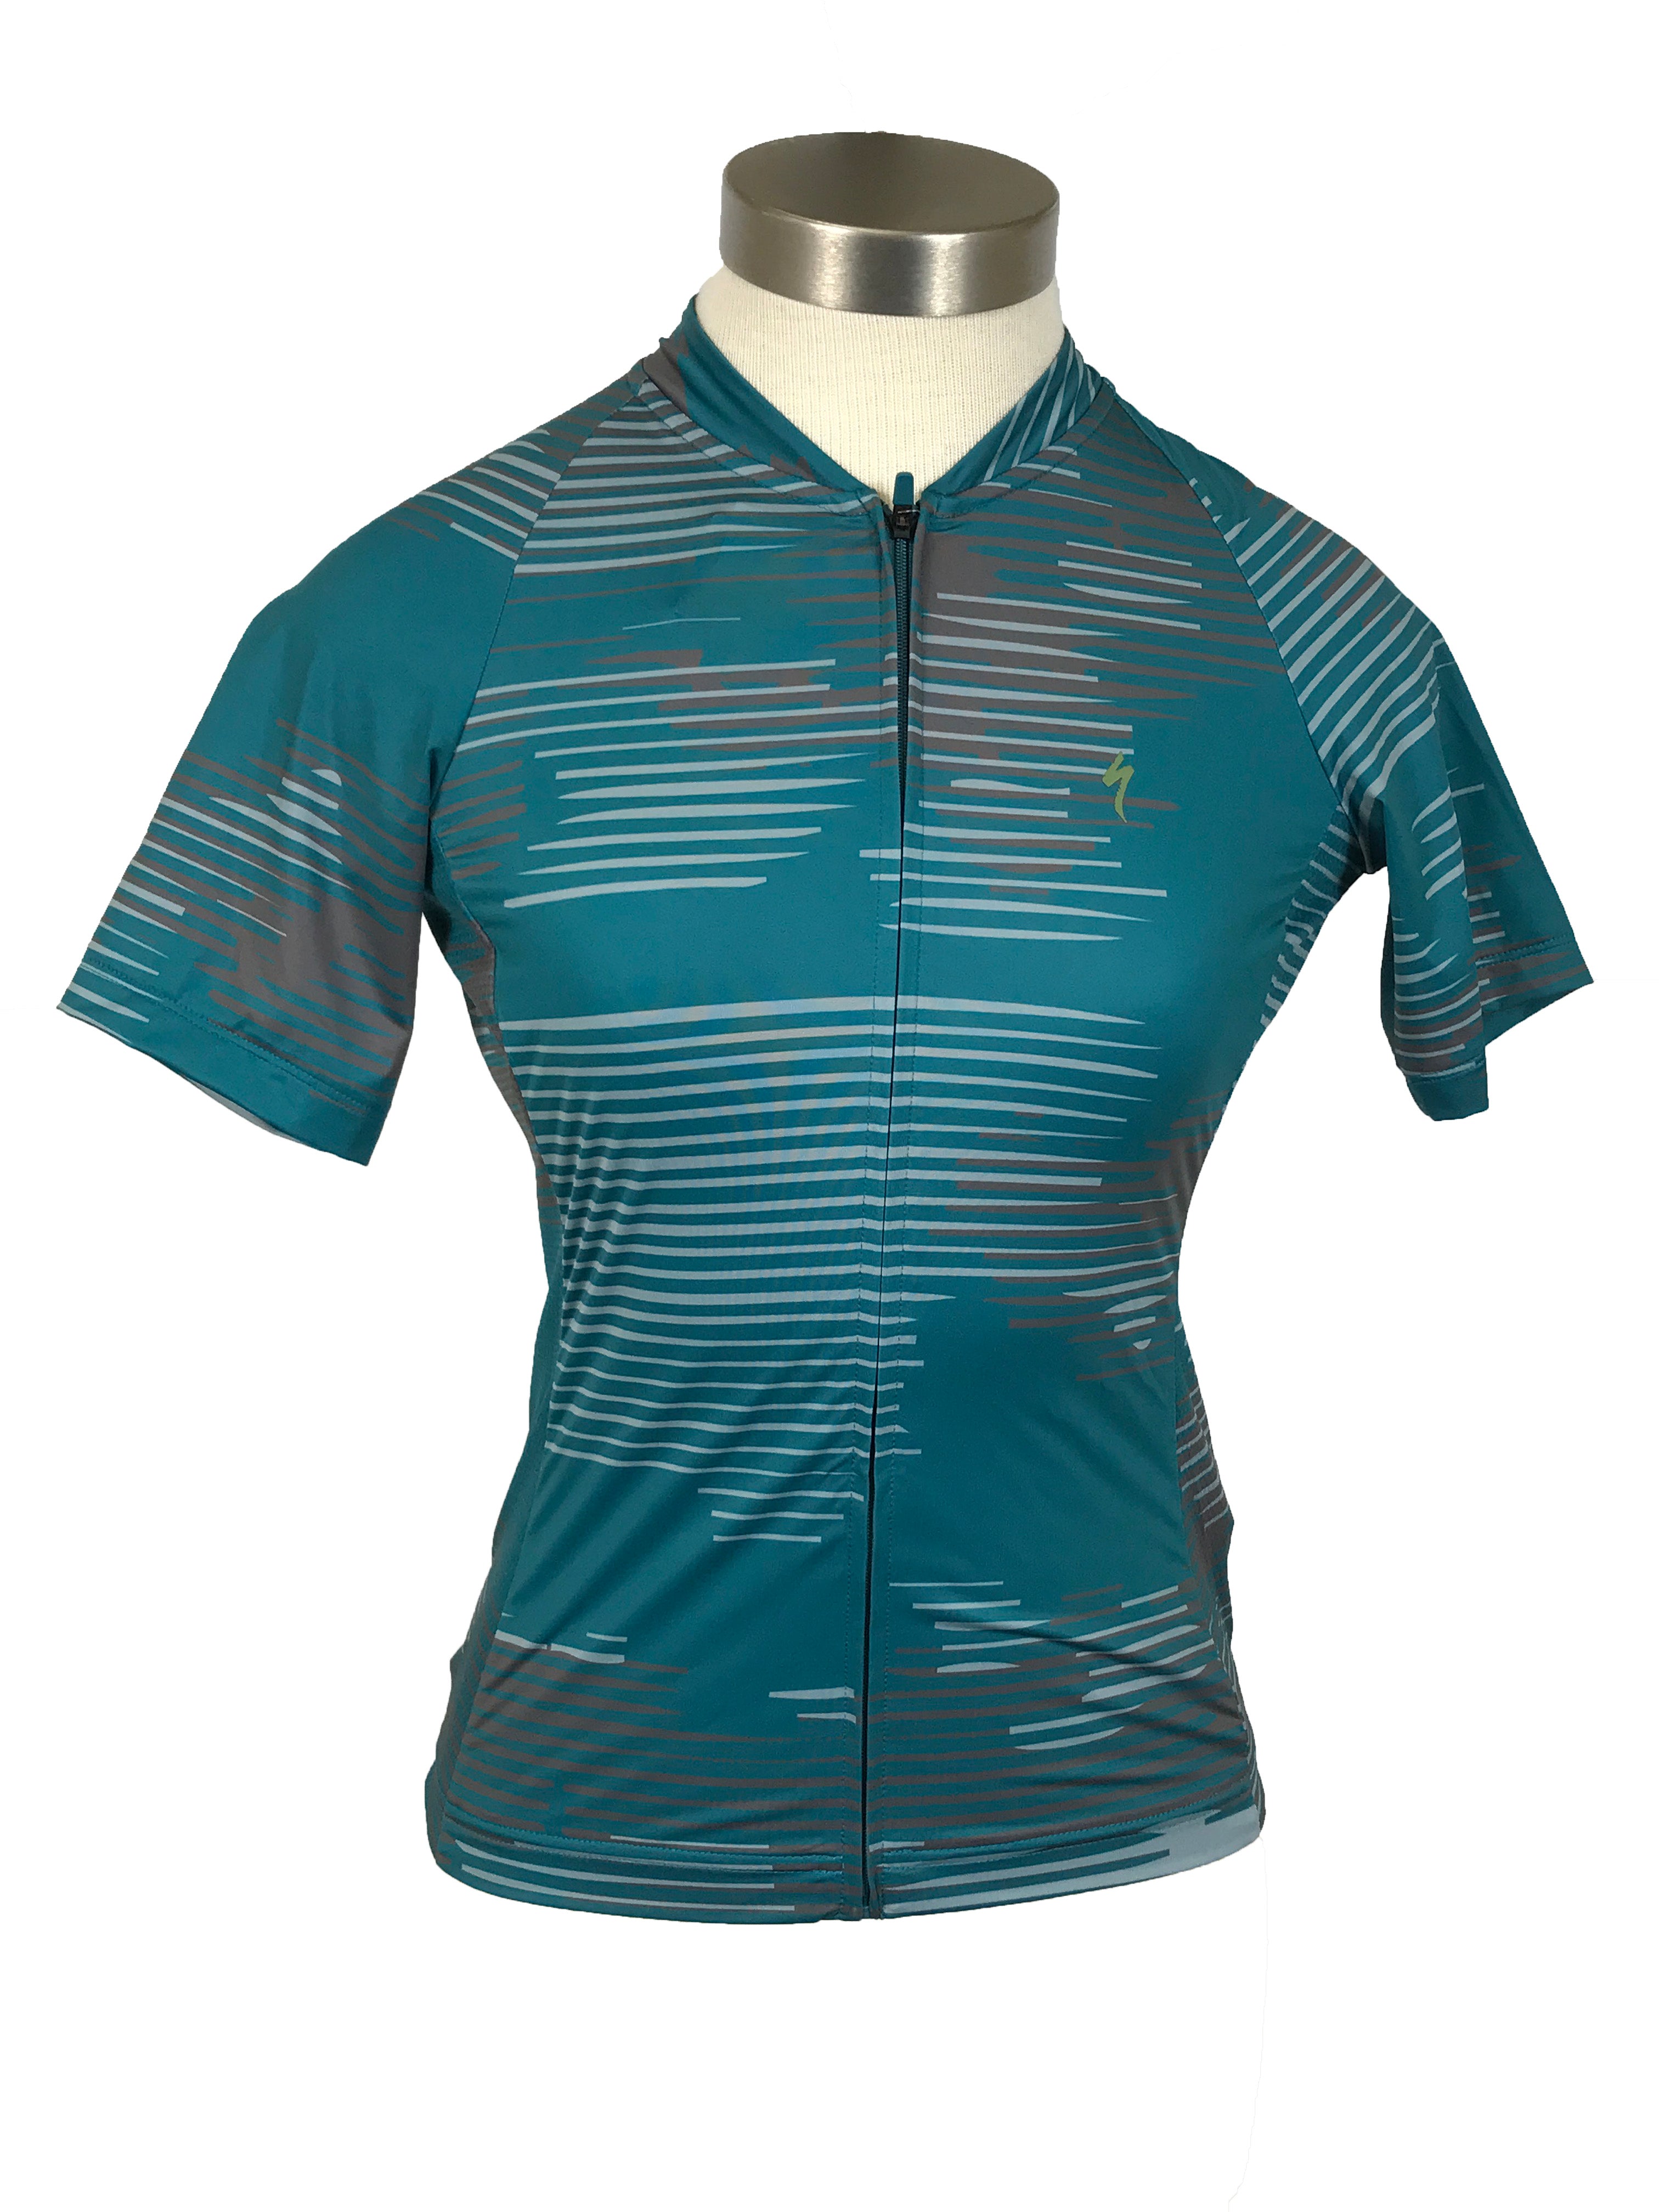 Specialized SL Blur Tropical Teal Short Sleeve Jersey Women's Size S NWT